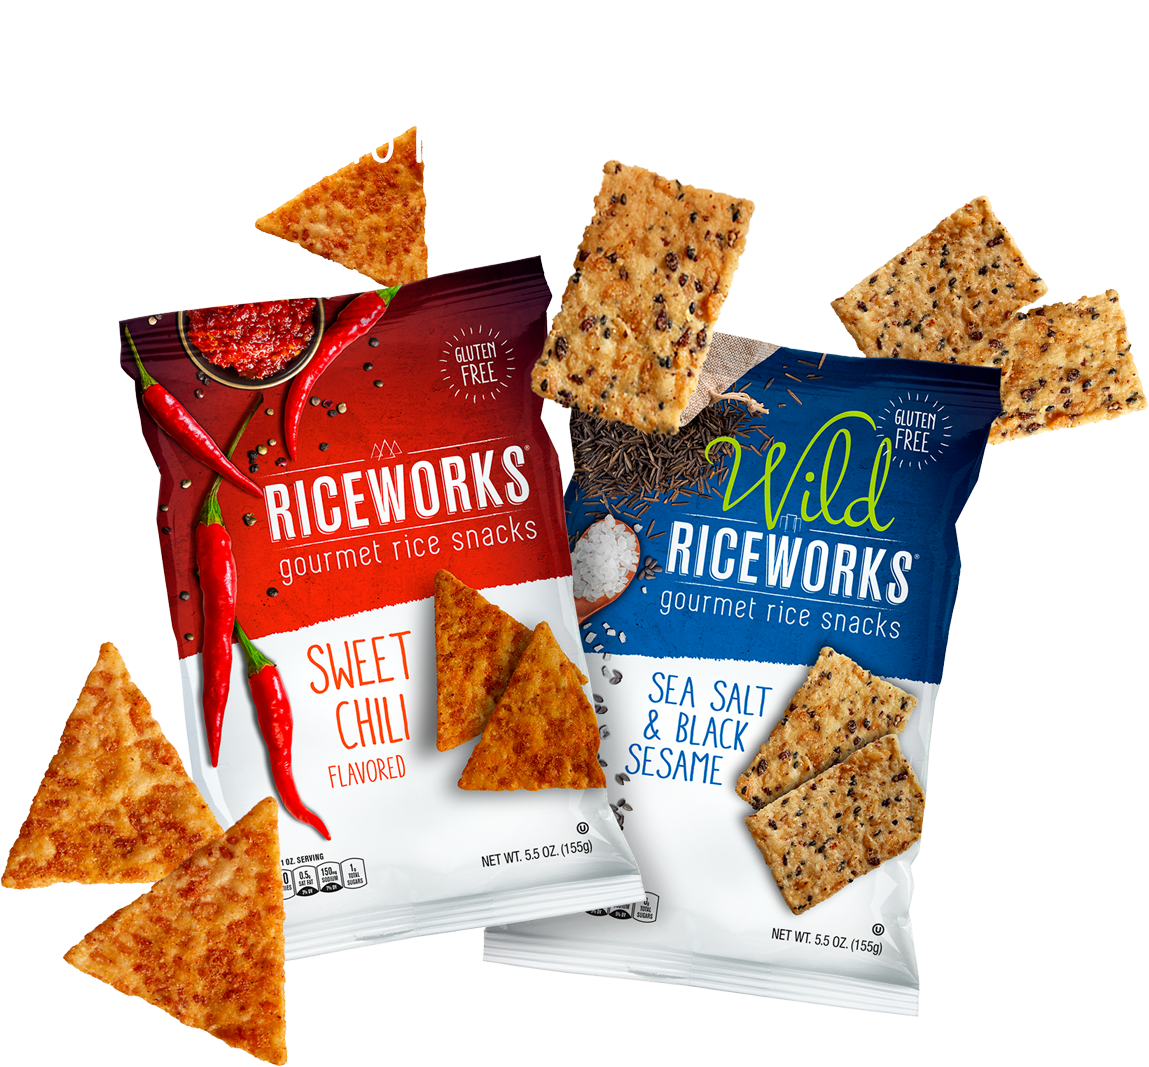 Riceworks Rice Chips are Crunchy Nutritious Deliciousness!